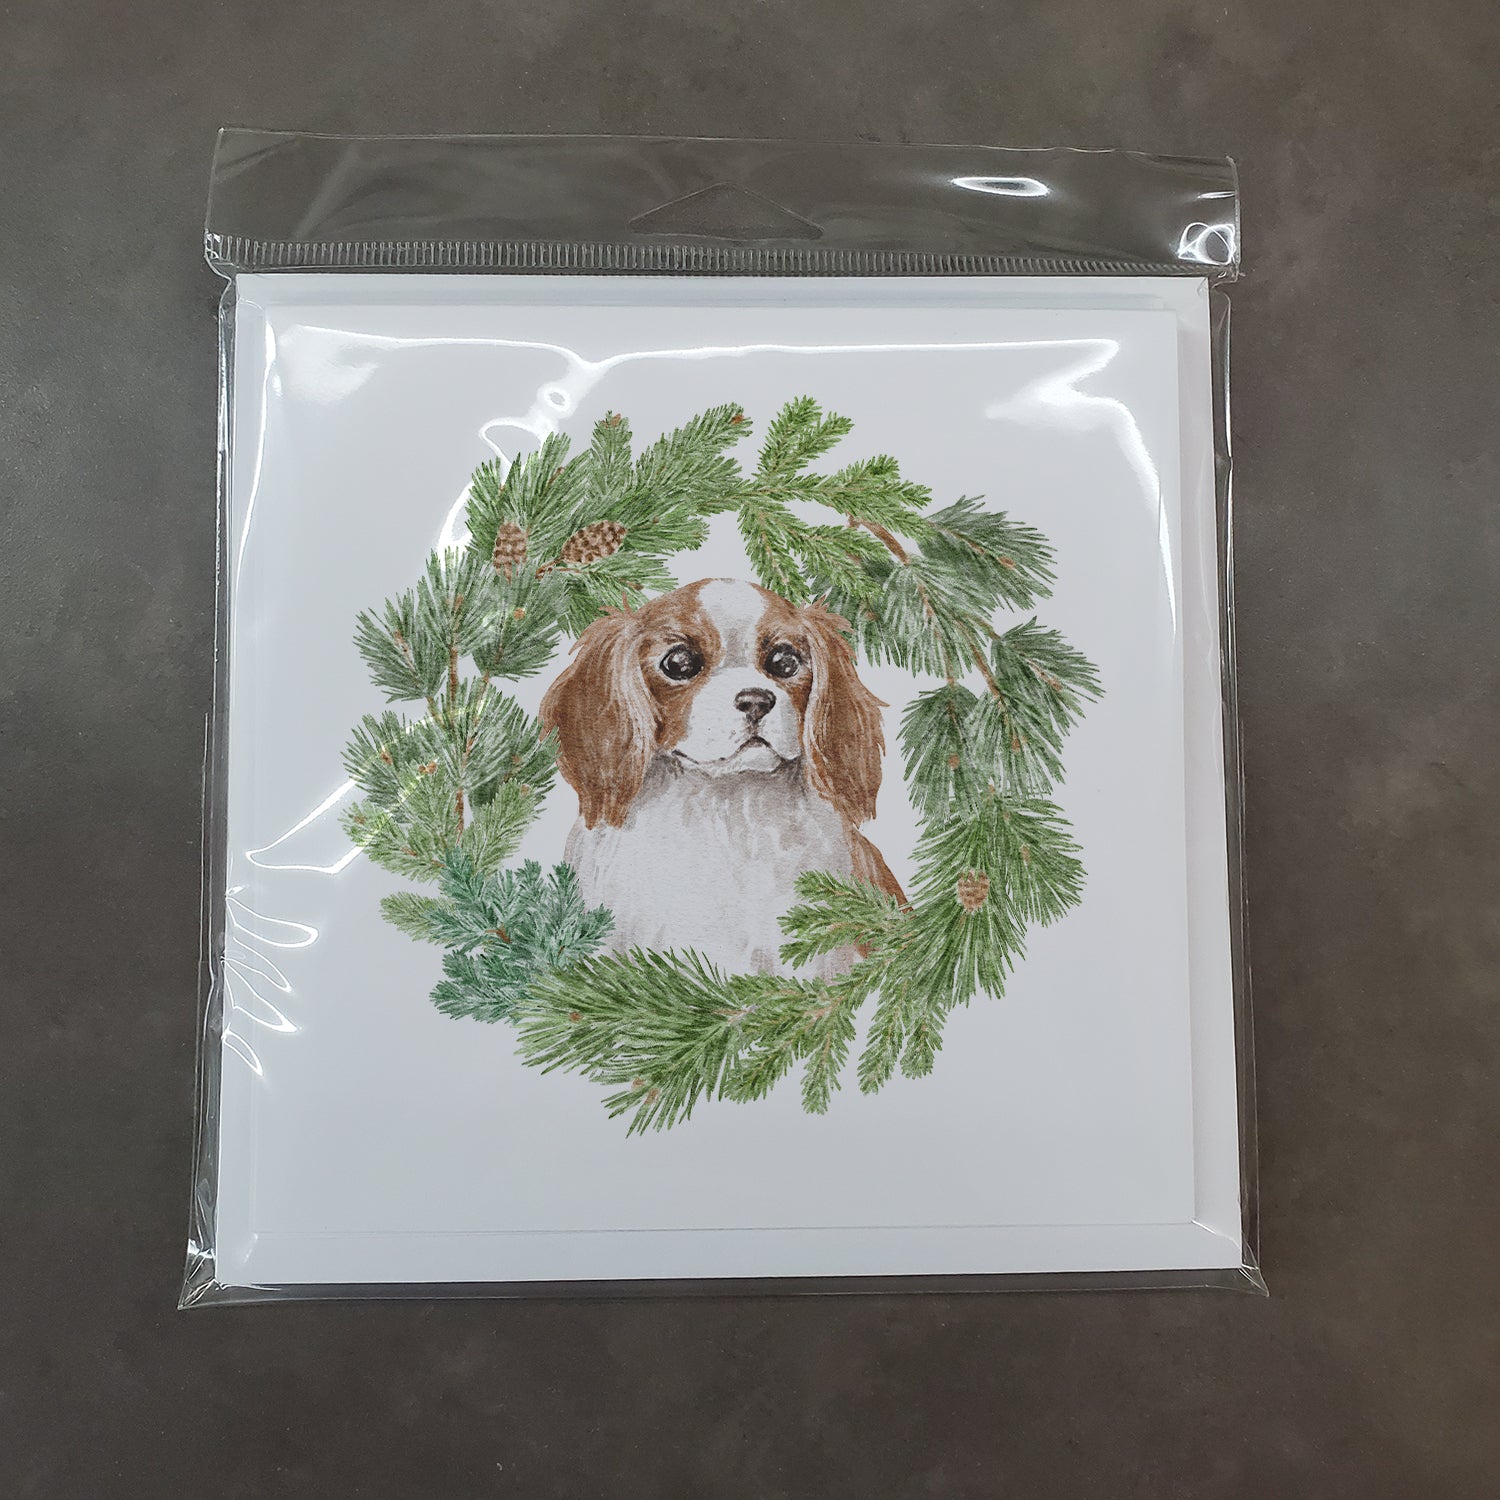 Cavalier King Charles Spaniel Blenheim Puppy Wide Eyed with Christmas Wreath Square Greeting Cards and Envelopes Pack of 8 - the-store.com